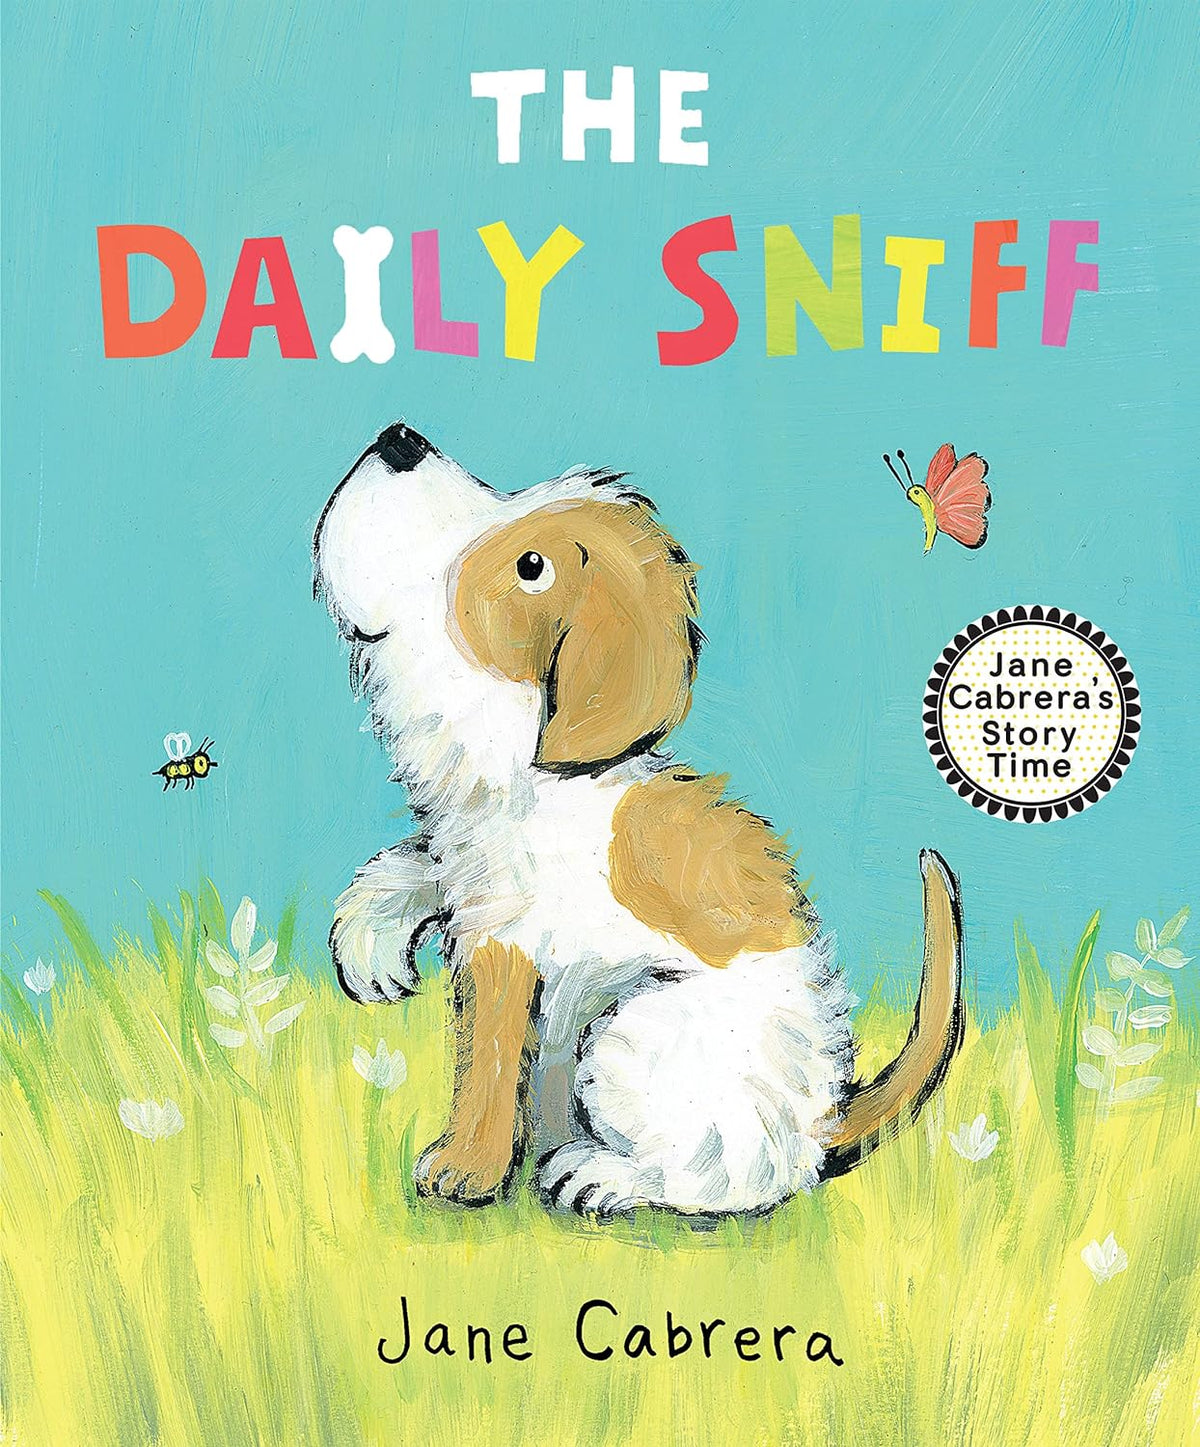 Jane Cabrera’s Daily Sniff